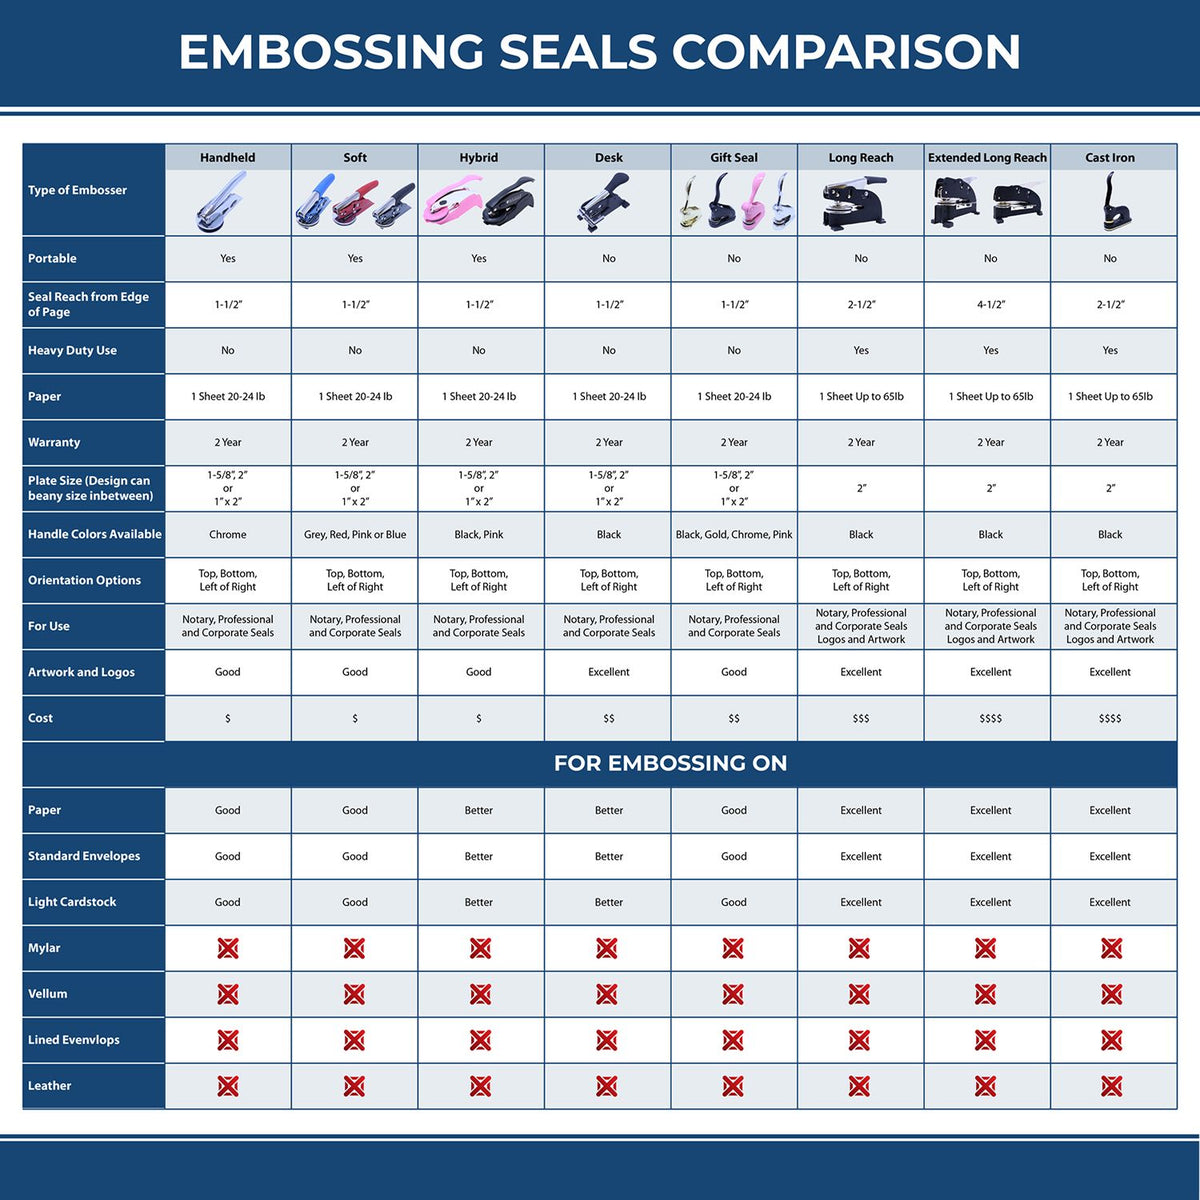 A comparison chart for the different types of mount models available for the Hybrid Arizona Engineer Seal